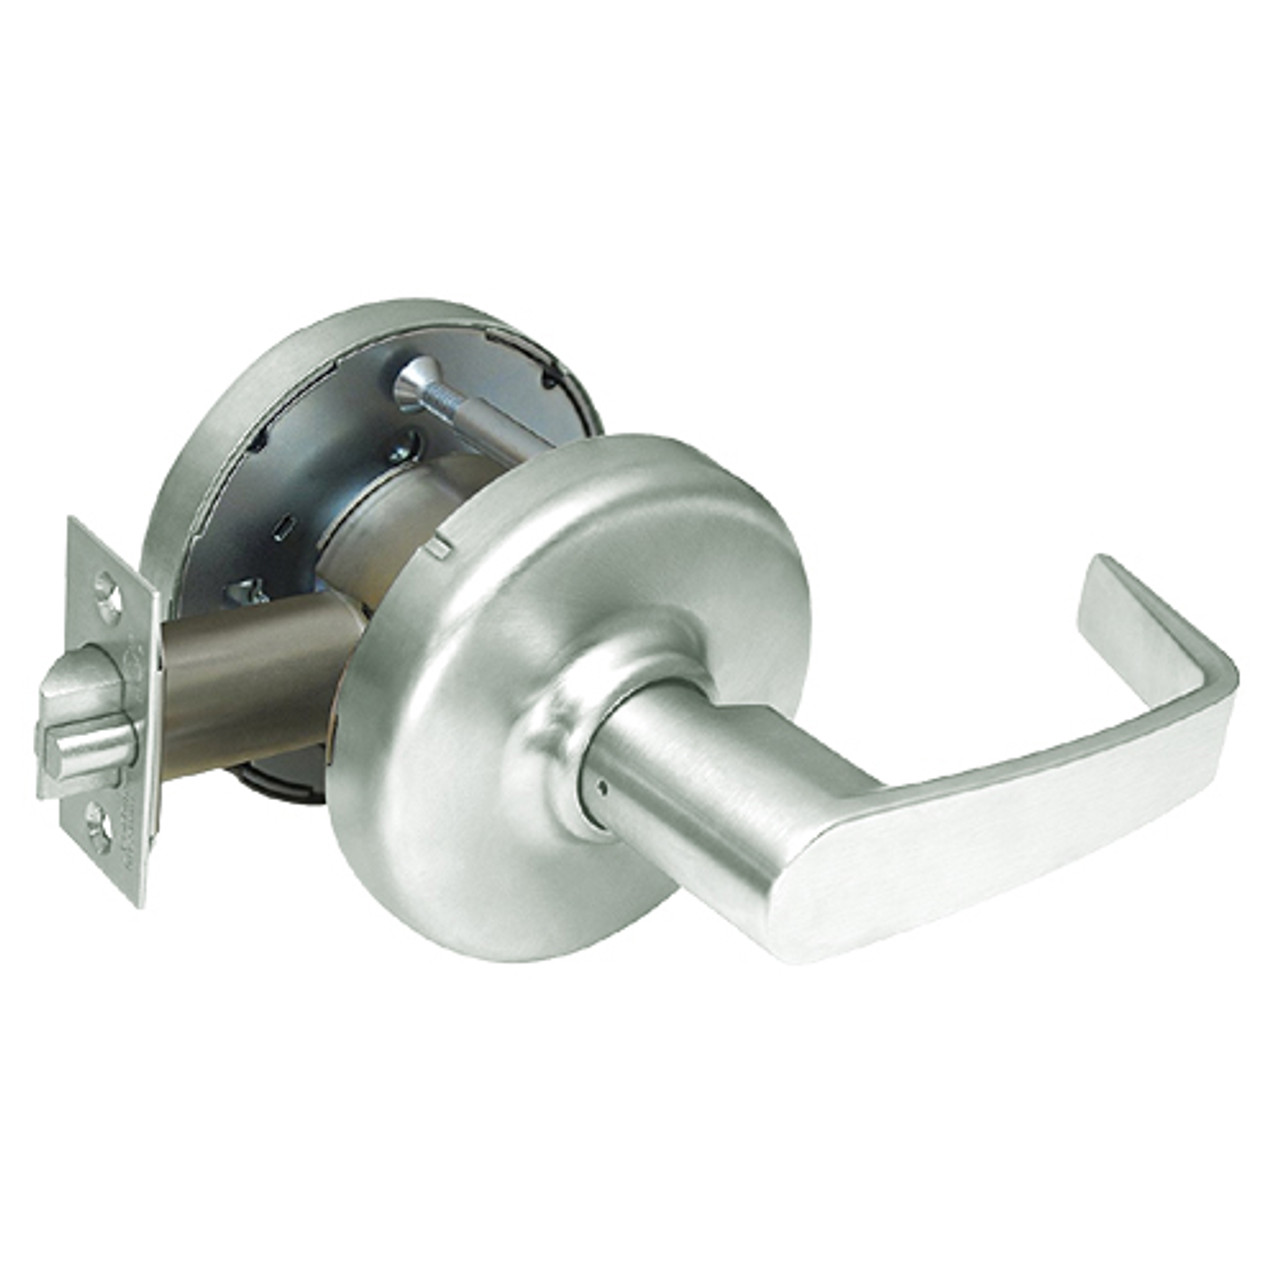 CL3390-NZD-618 Corbin CL3300 Series Extra Heavy Duty Passage with Turnpiece Cylindrical Locksets with Newport Lever in Bright Nickel Plated Finish